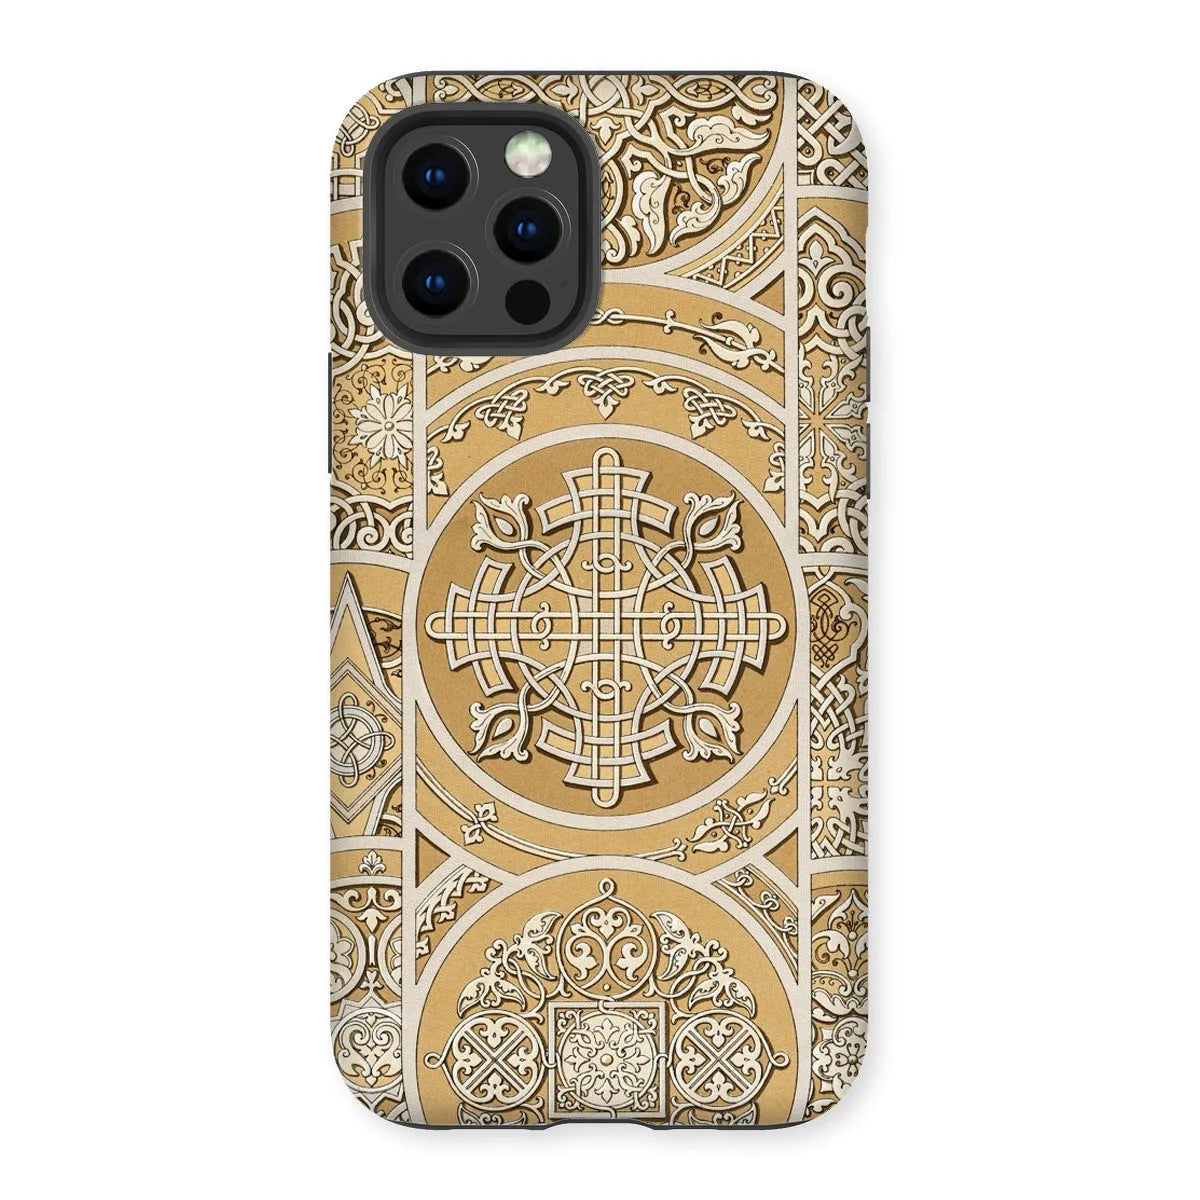 Russian Pattern By Auguste Racinet Tough Phone Case - Iphone 12 Pro / Matte - Mobile Phone Cases - Aesthetic Art